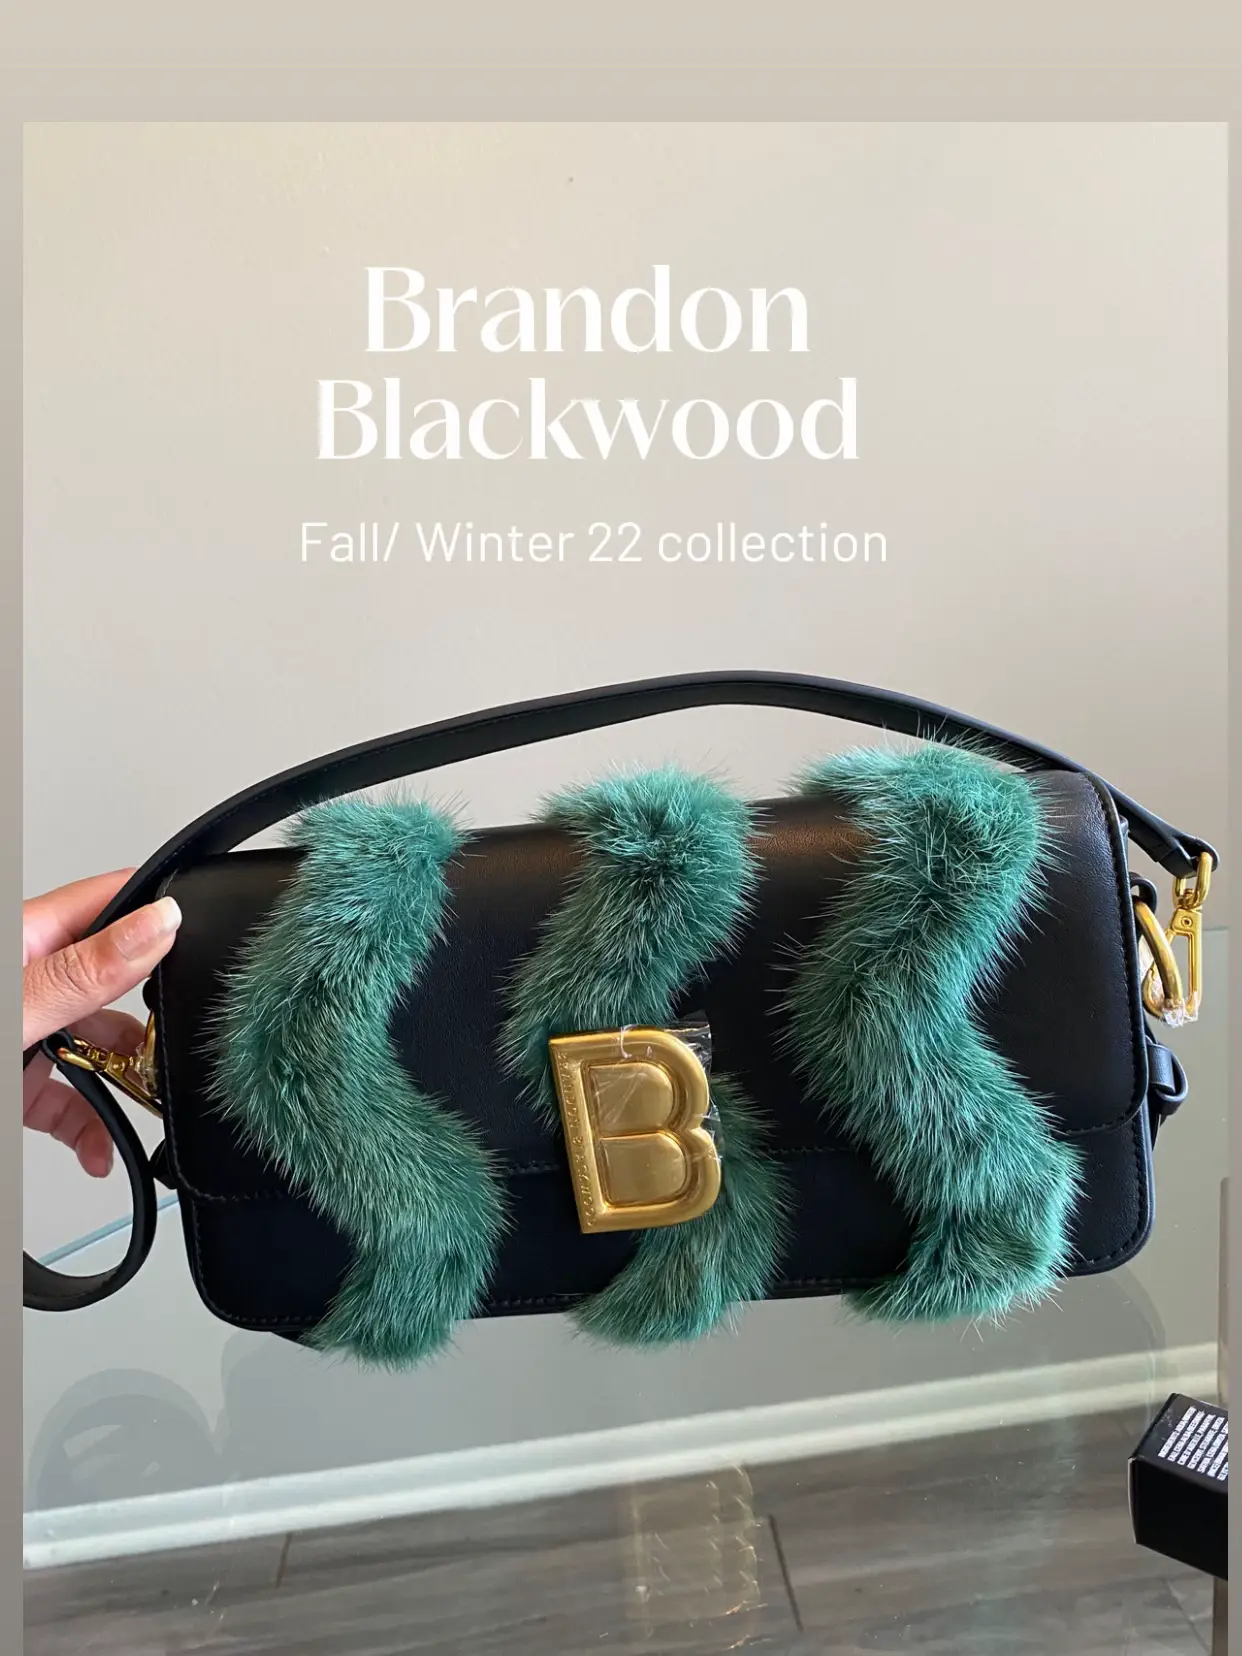 Brandon Blackwood Bamboo B Tote Unboxing & first impression 